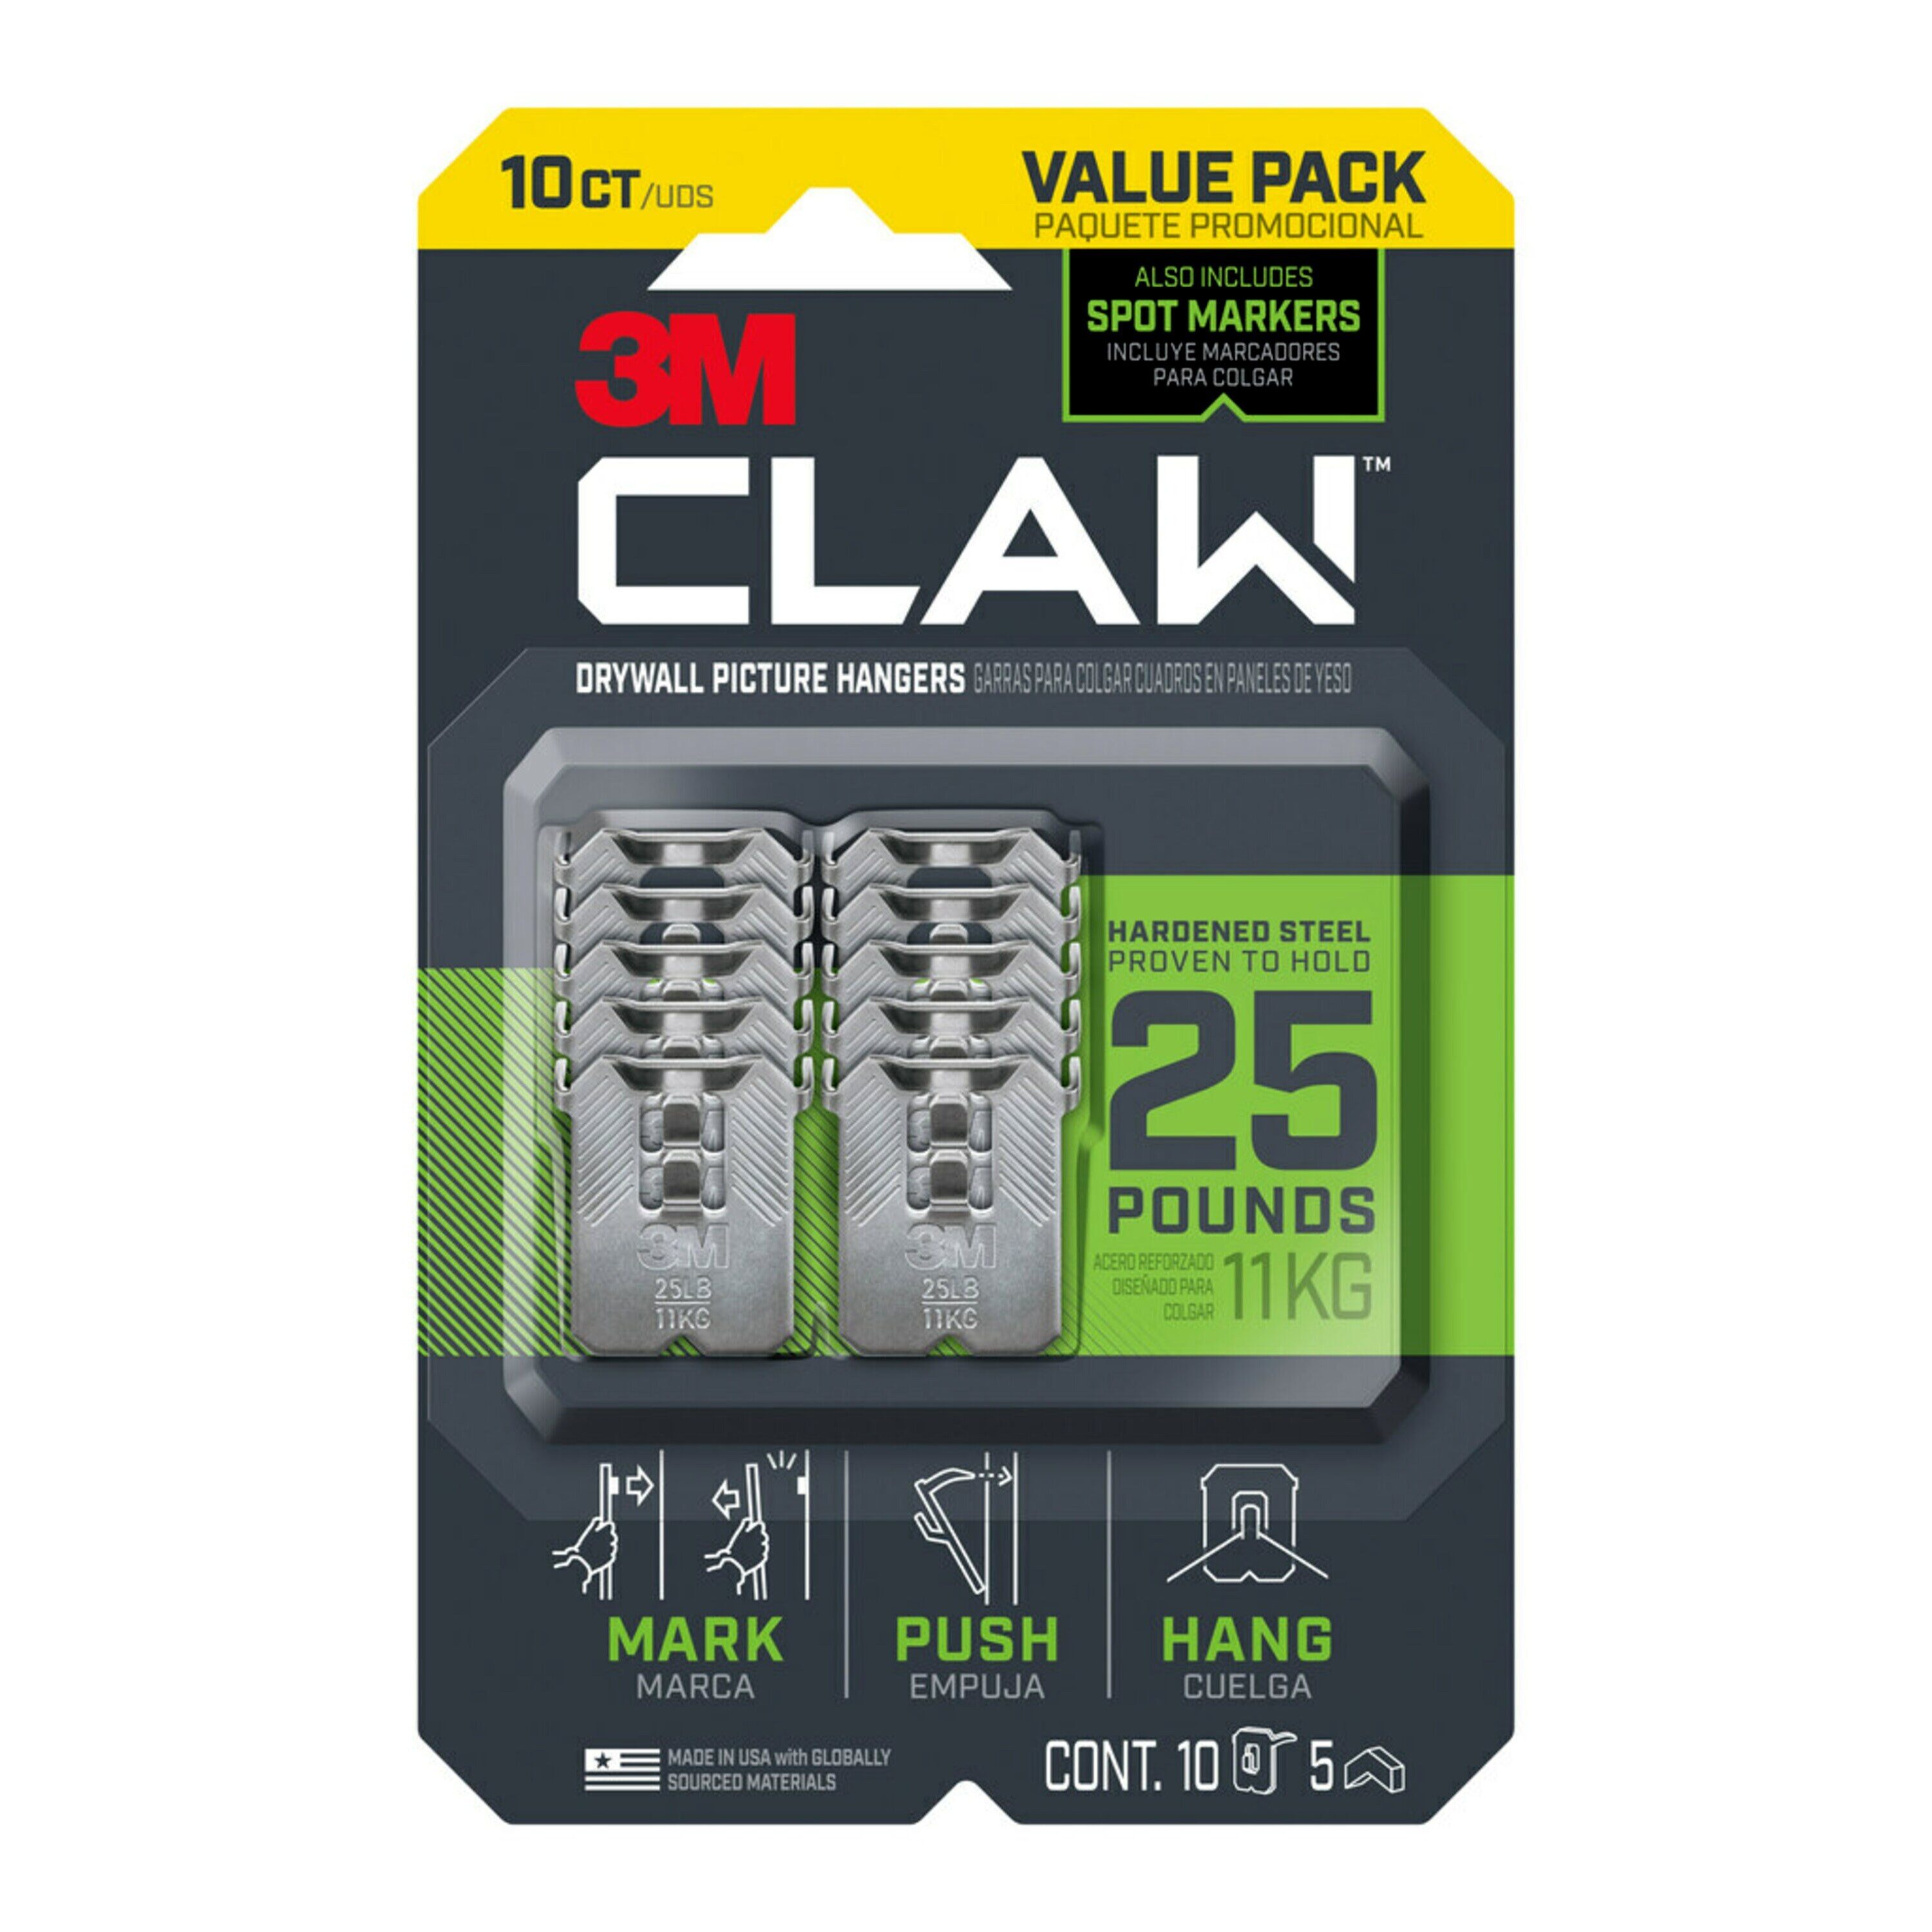 3m Claw Drywall Picture Hanger 65lb With Temporary Spot Marker + 2